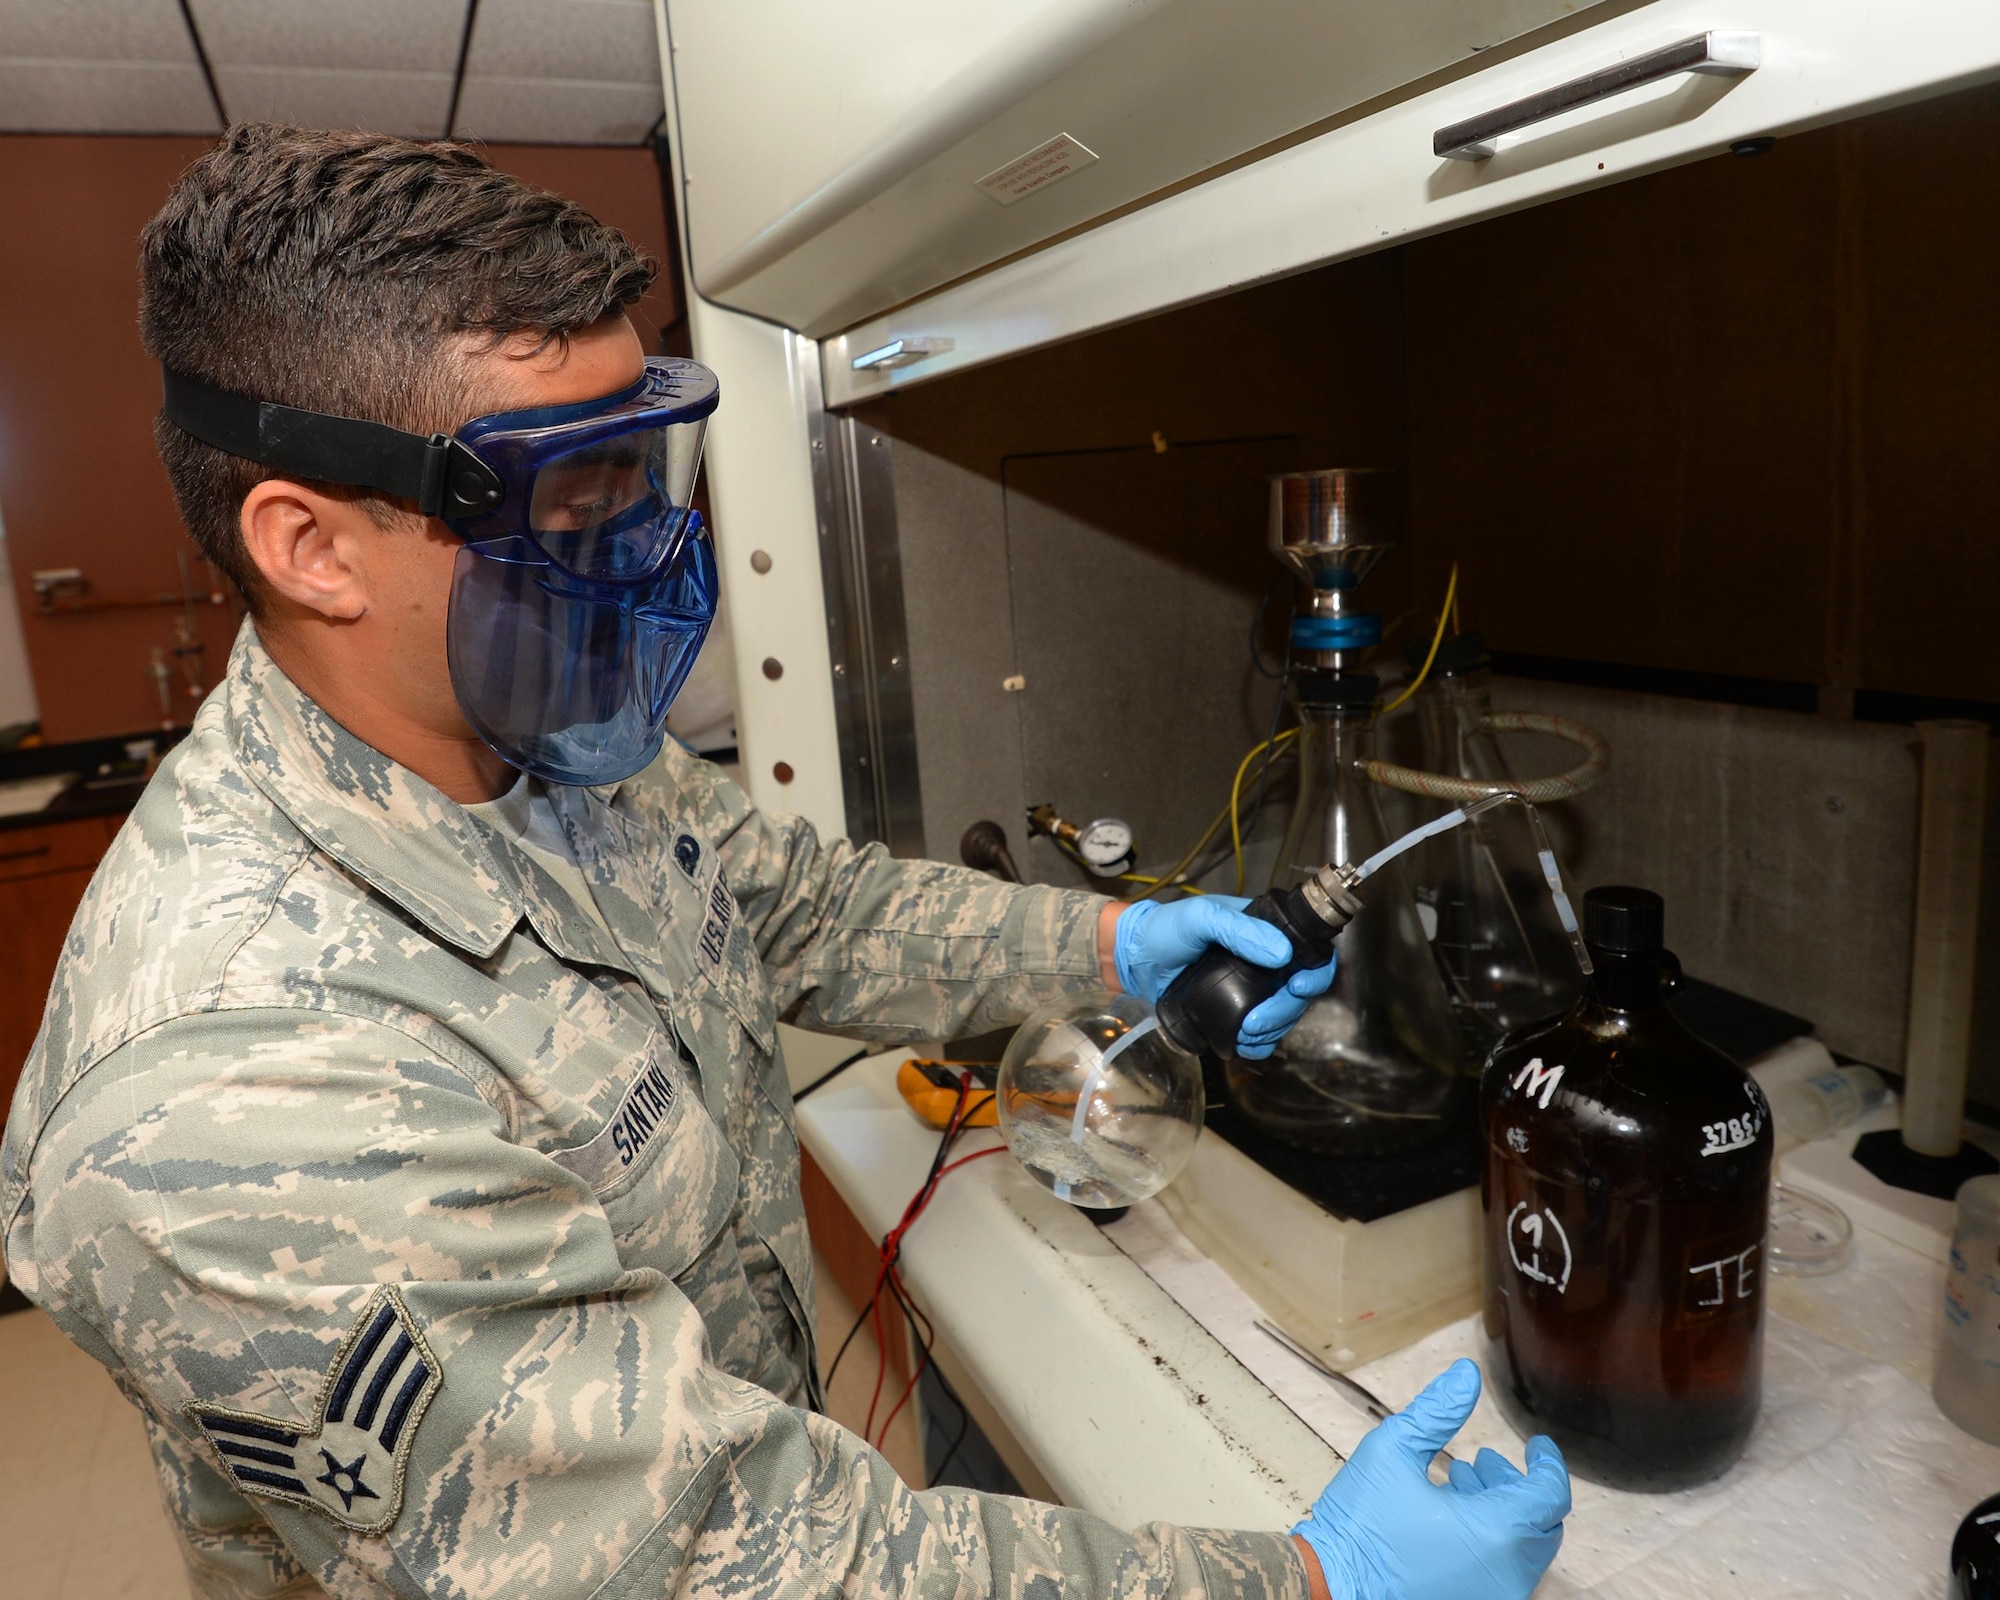 Senior Airman Omar Santana, 325th Logistics Readiness Squadron fuels laboratory technician, performs a particulate matter test on a fuels sample at Tyndall Air Force Base, April 5.  The testing lab at the Fuels Management Flight performs constant testing of the quality of fuel that is shipped to Tyndall. This ensures the F-22 Raptor gets the highest quality of fuel to keep it projecting air combat superiority. (U.S. Air Force photo by Airman 1st Class Cody R. Miller/Released)